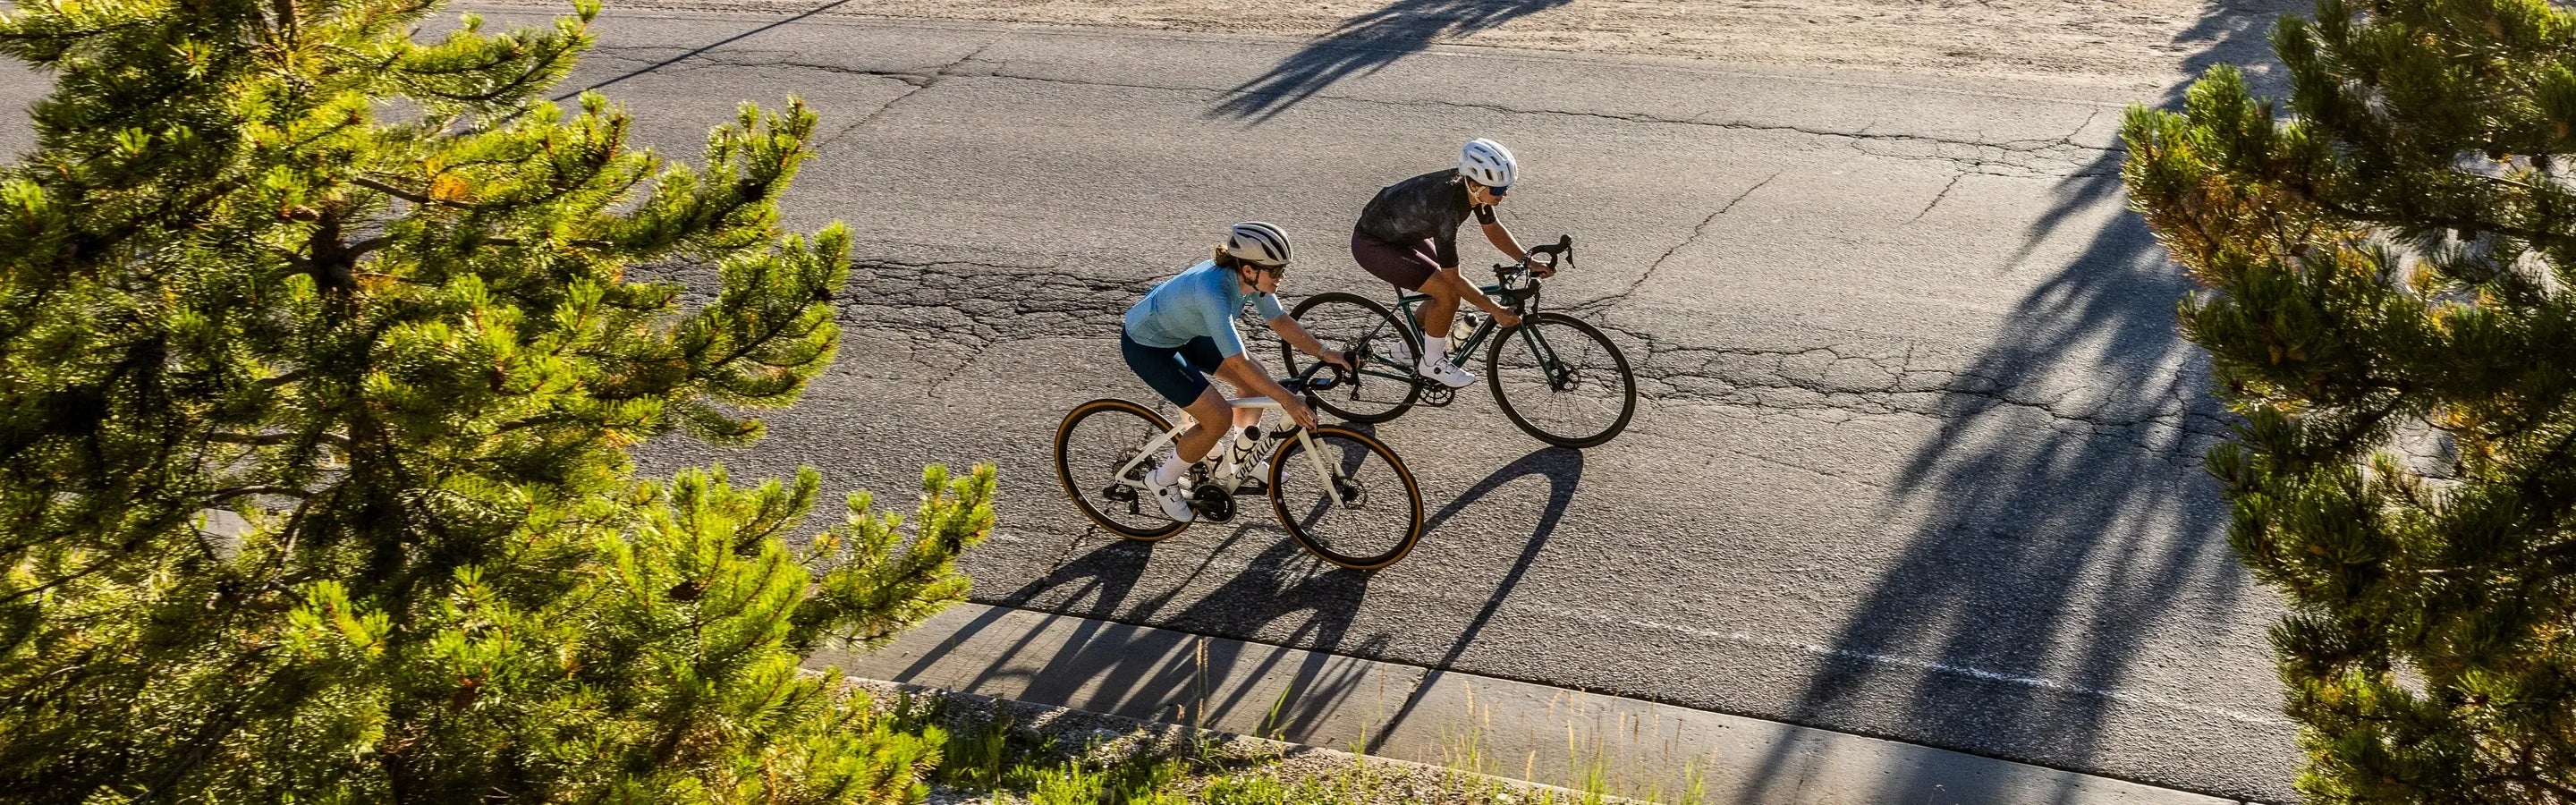 above view of two cyclists riding bicycles on a road